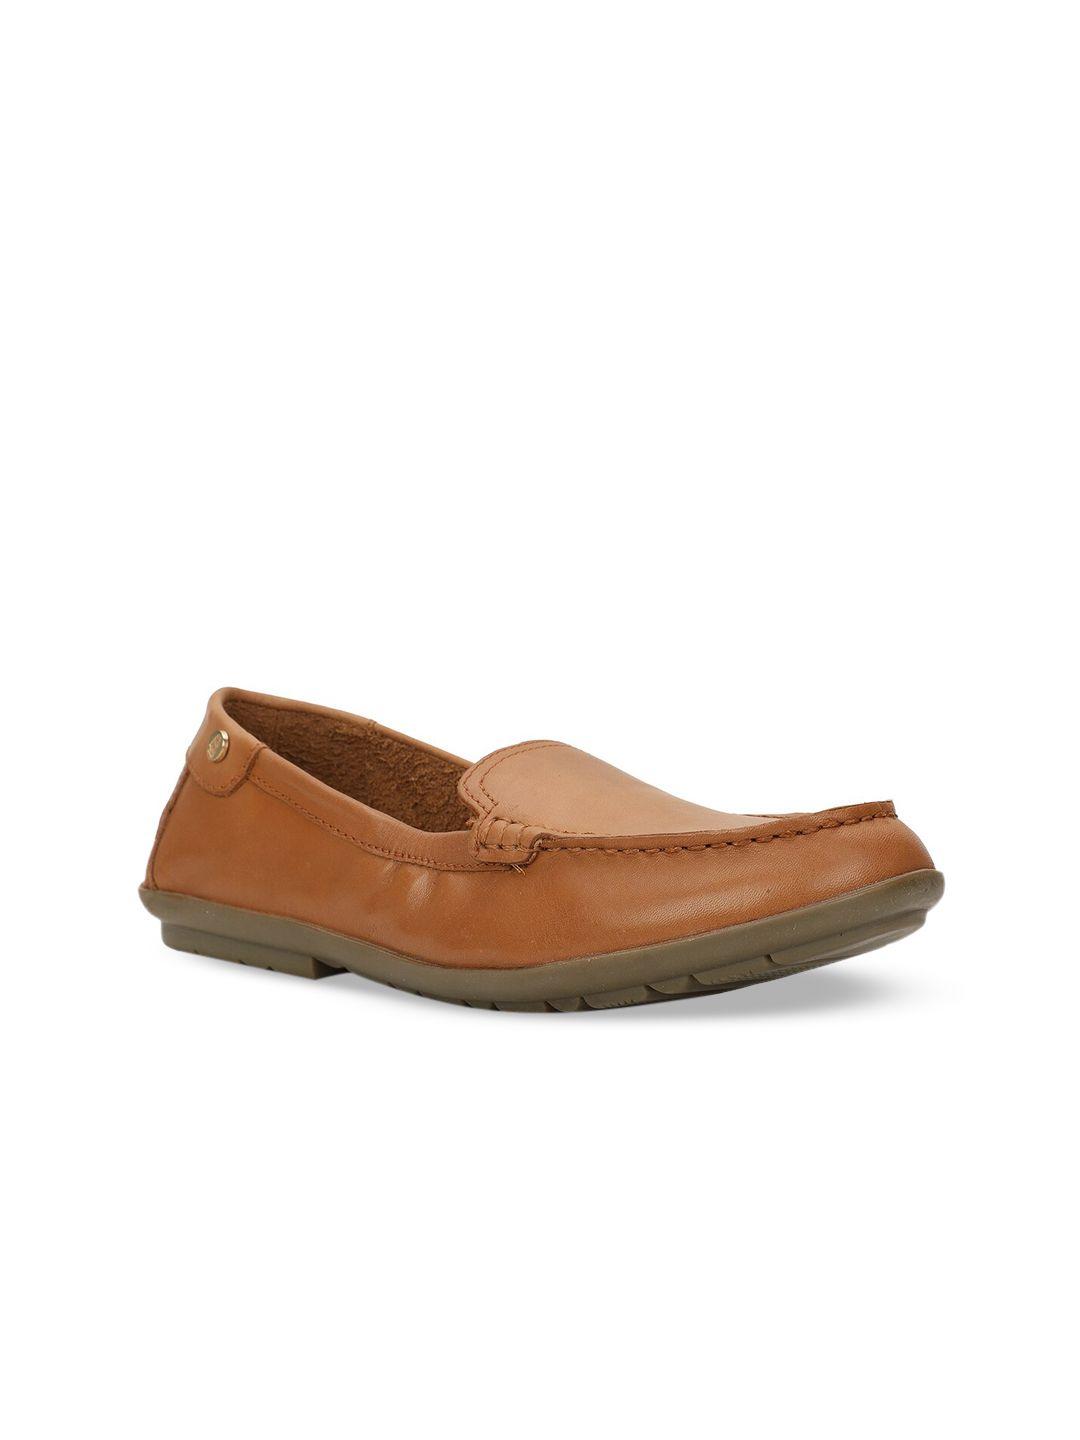 hush-puppies-women-leather-loafers